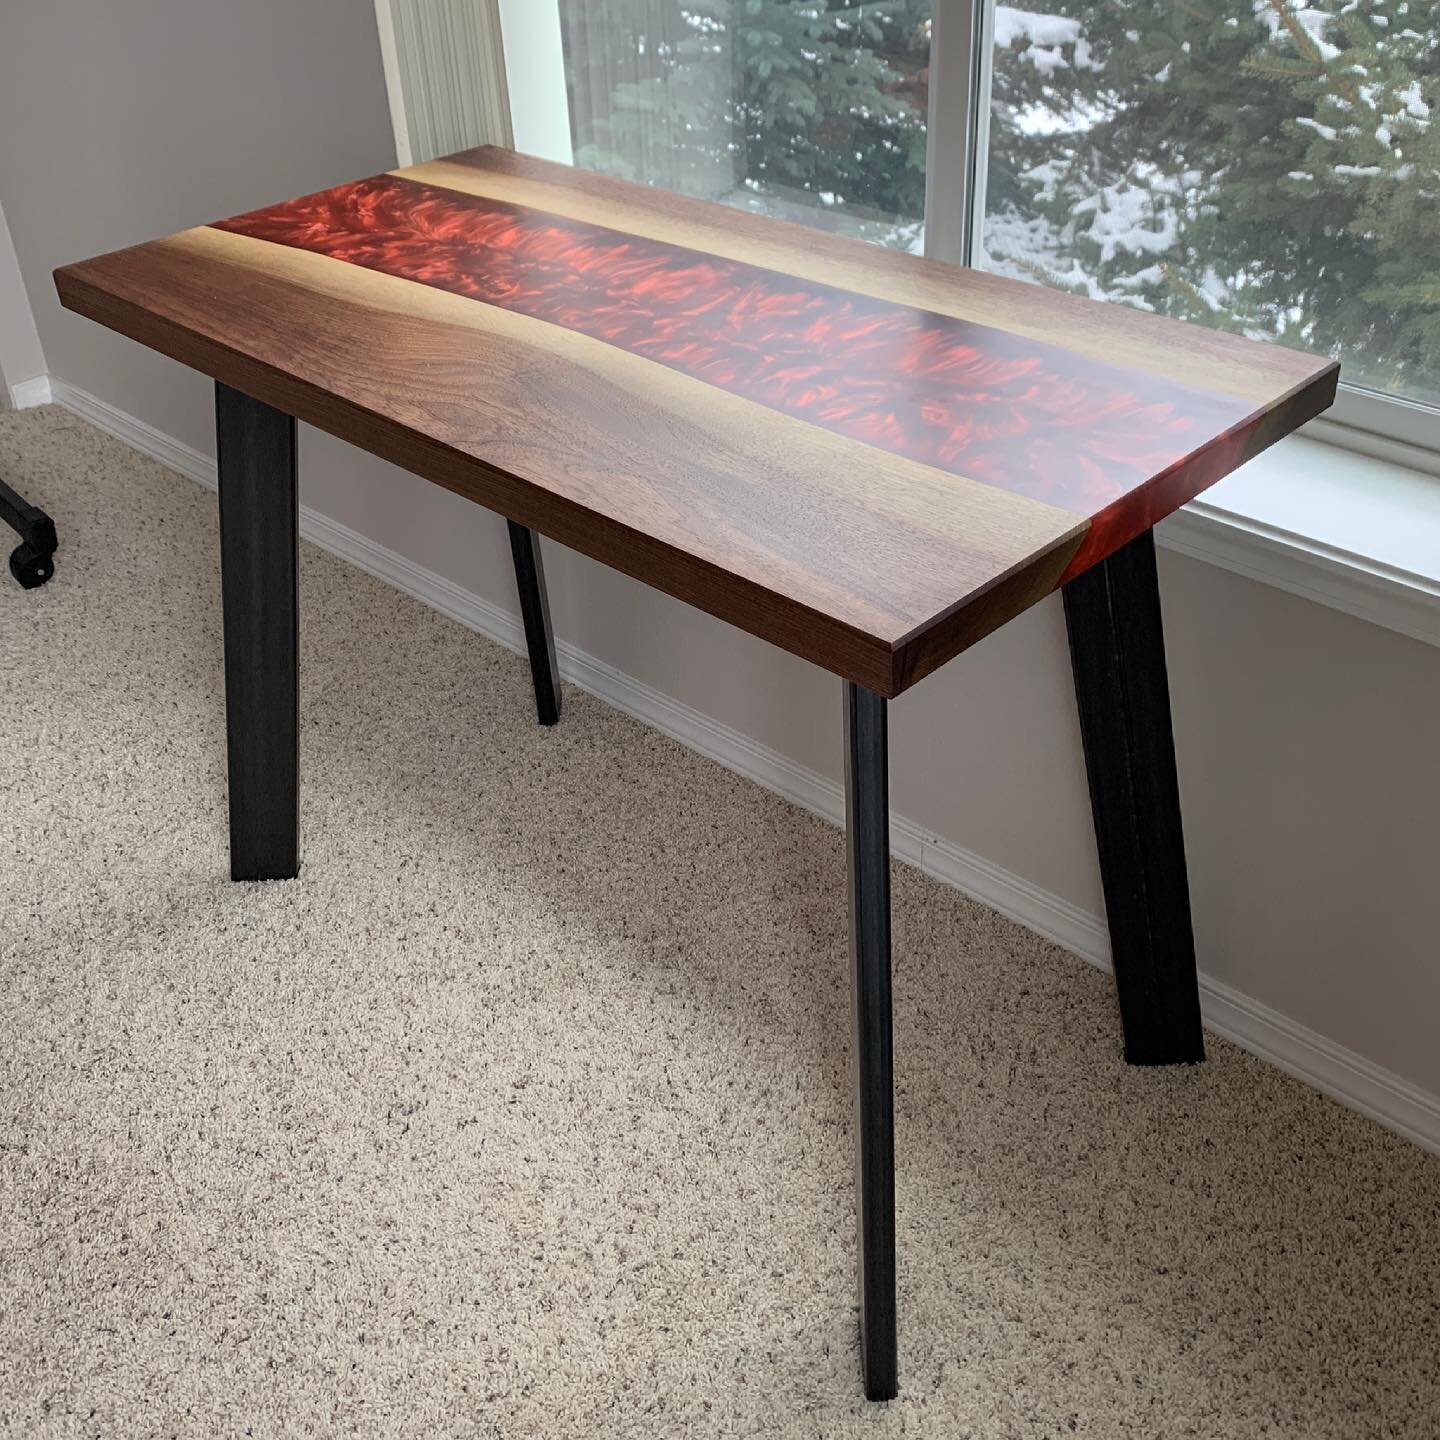 Done &amp; delivered! The Hot Lava River Desk is in it&rsquo;s new home.
&bull;
Thank you to all our partners on this one:
@jeffmacksupply
@ecopoxy 
@rubiomonocoatusa 
@symmetryhardware 
&bull;
#lovethat #customdesk #spokaneinteriordesign #interiorde